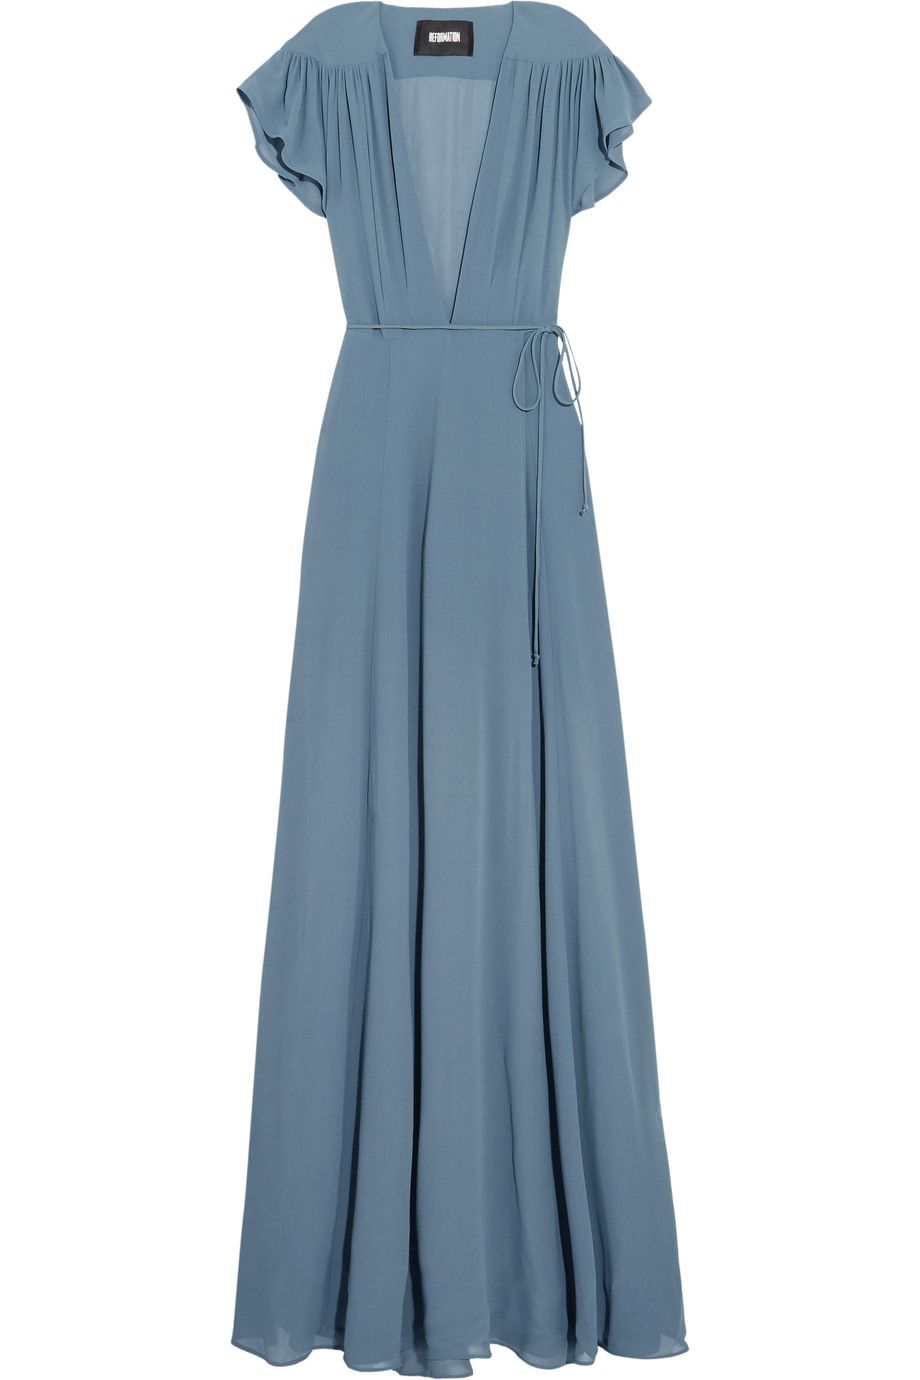 Clothing, Dress, Day dress, Sleeve, Turquoise, Aqua, Gown, Cocktail dress, A-line, Formal wear, 